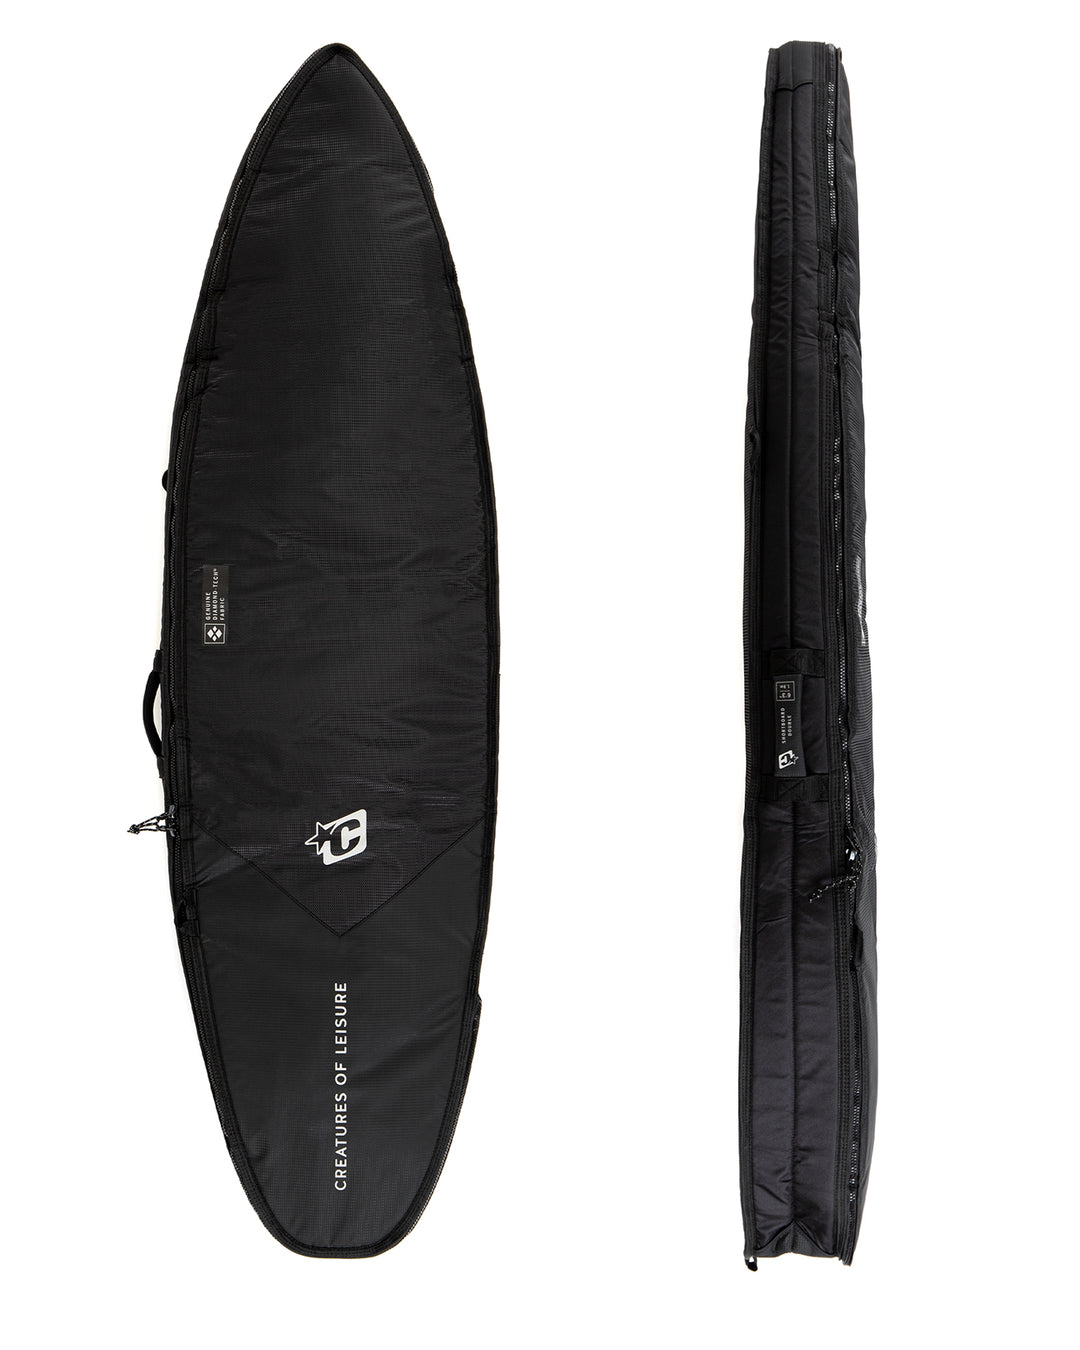 Shortboard Double DT2.0 Surfboard Cover